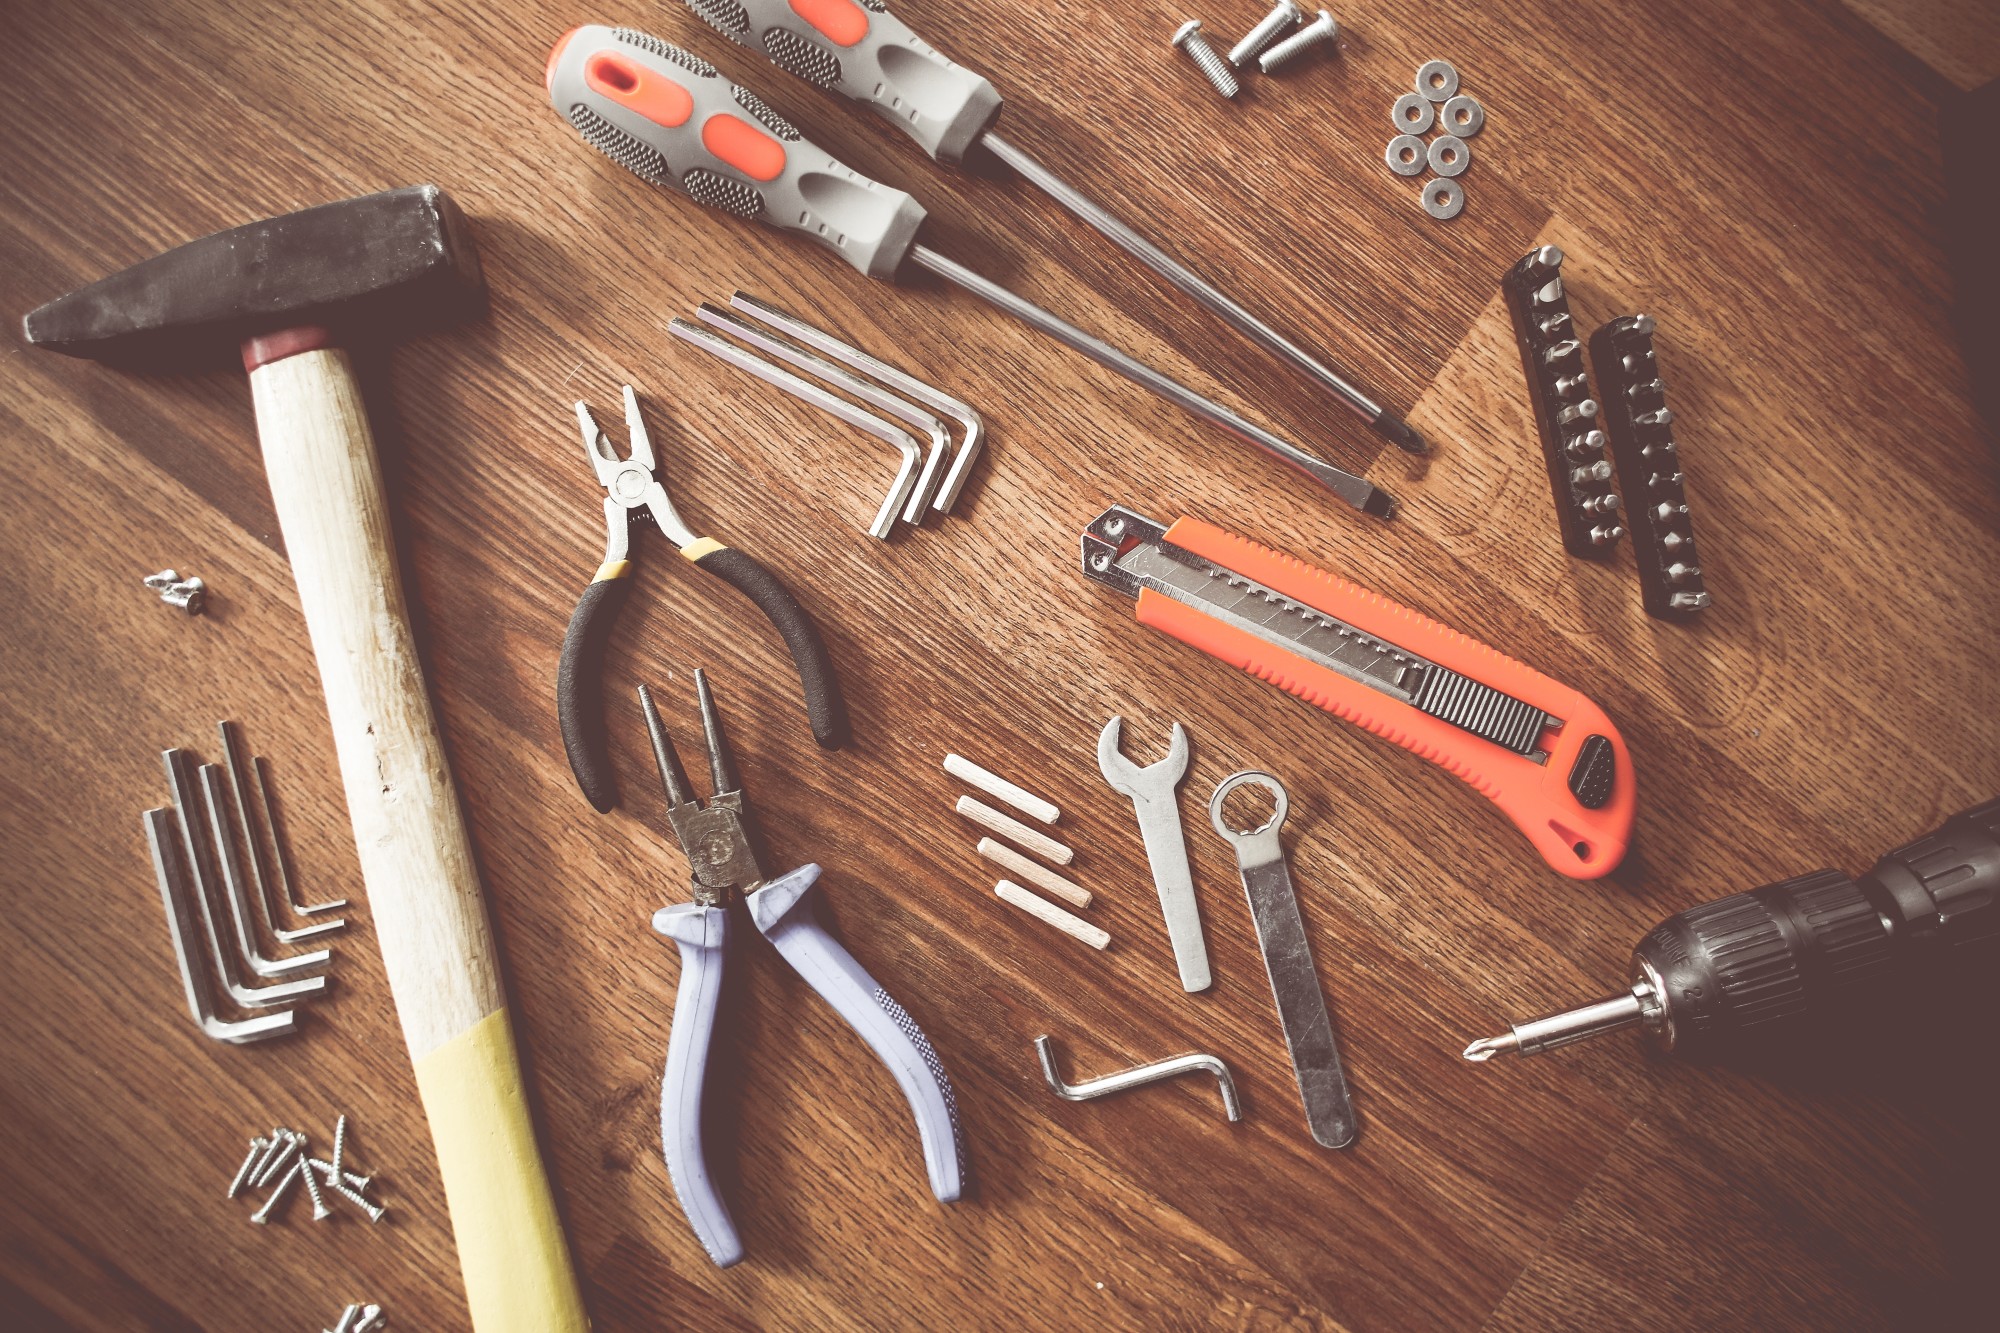 DIY Renovation vs Hiring the Pros: How to Decide Which Option is Best